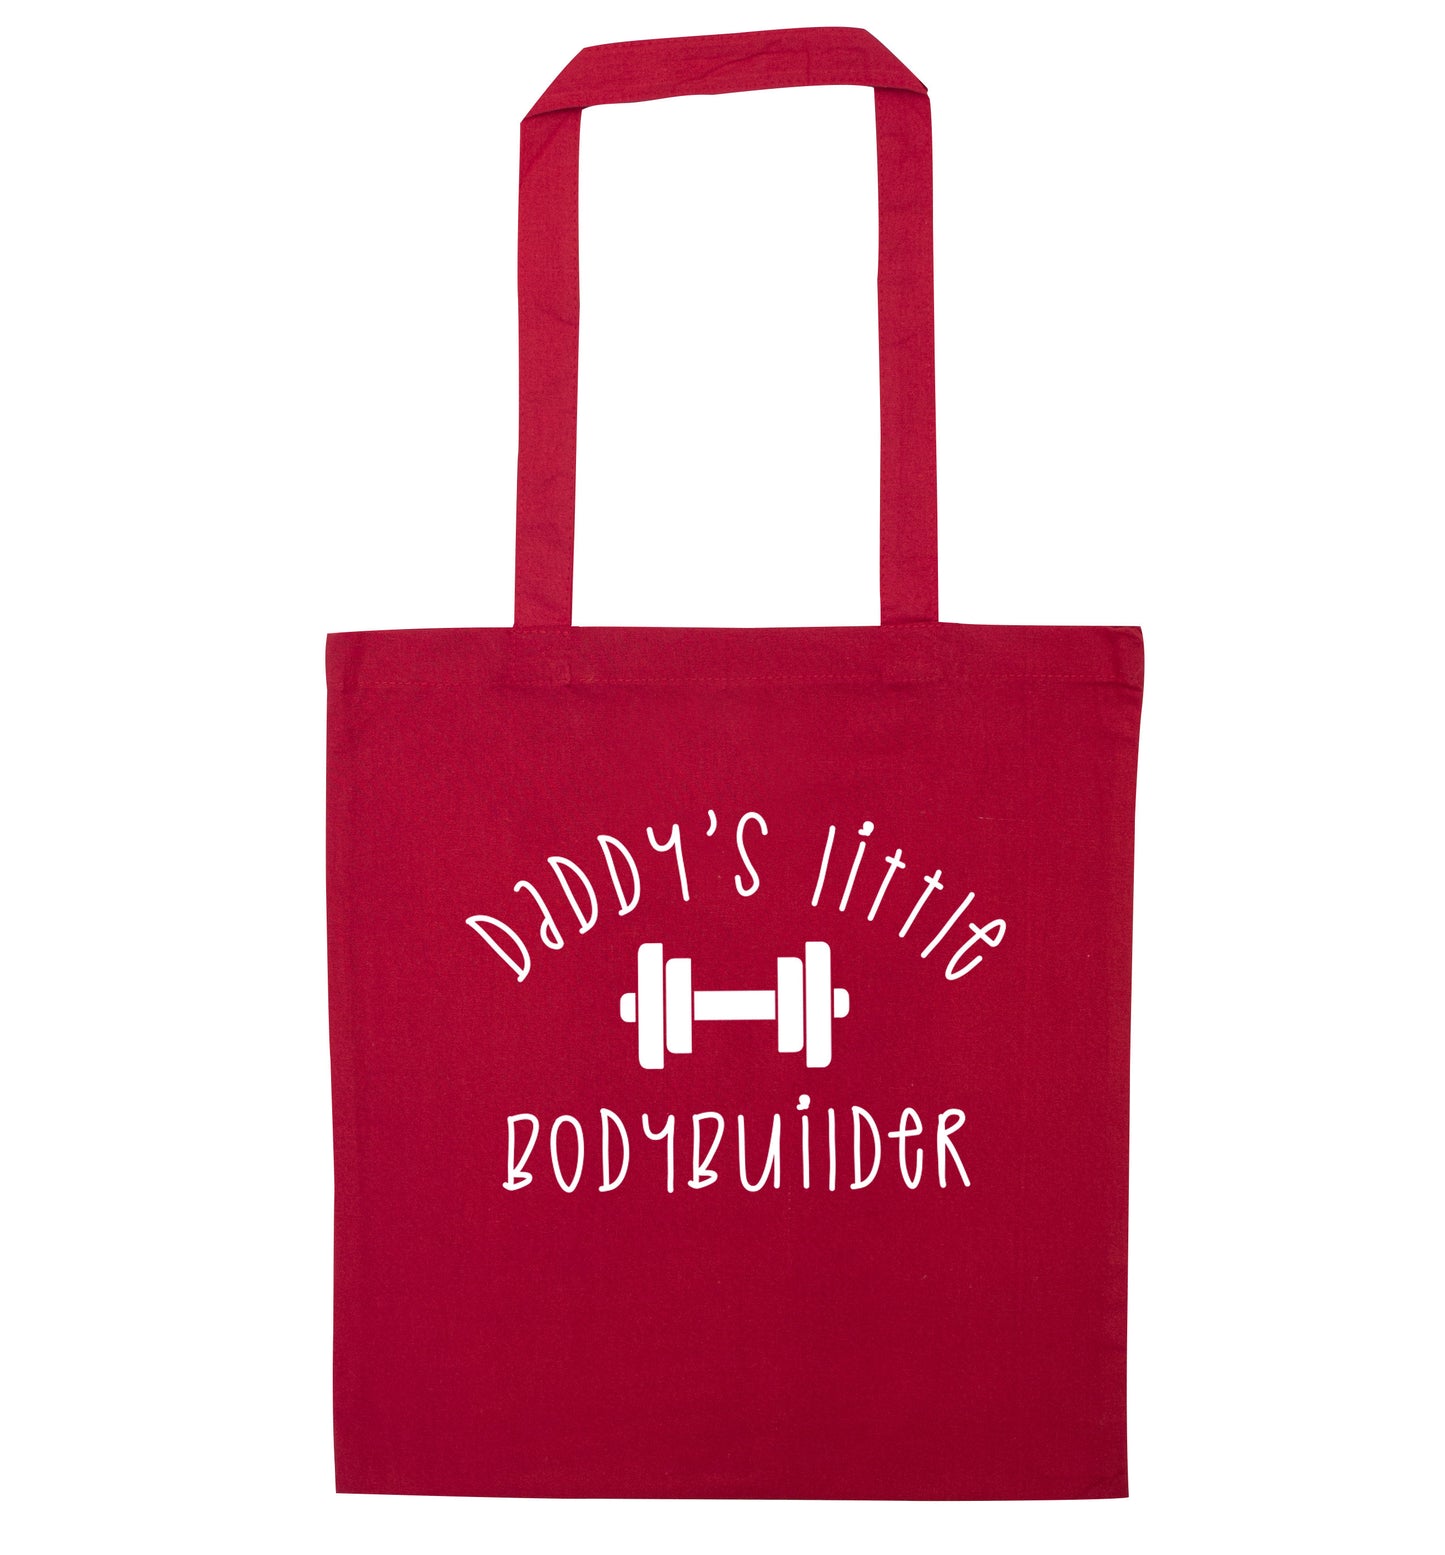 Daddy's little bodybuilder red tote bag